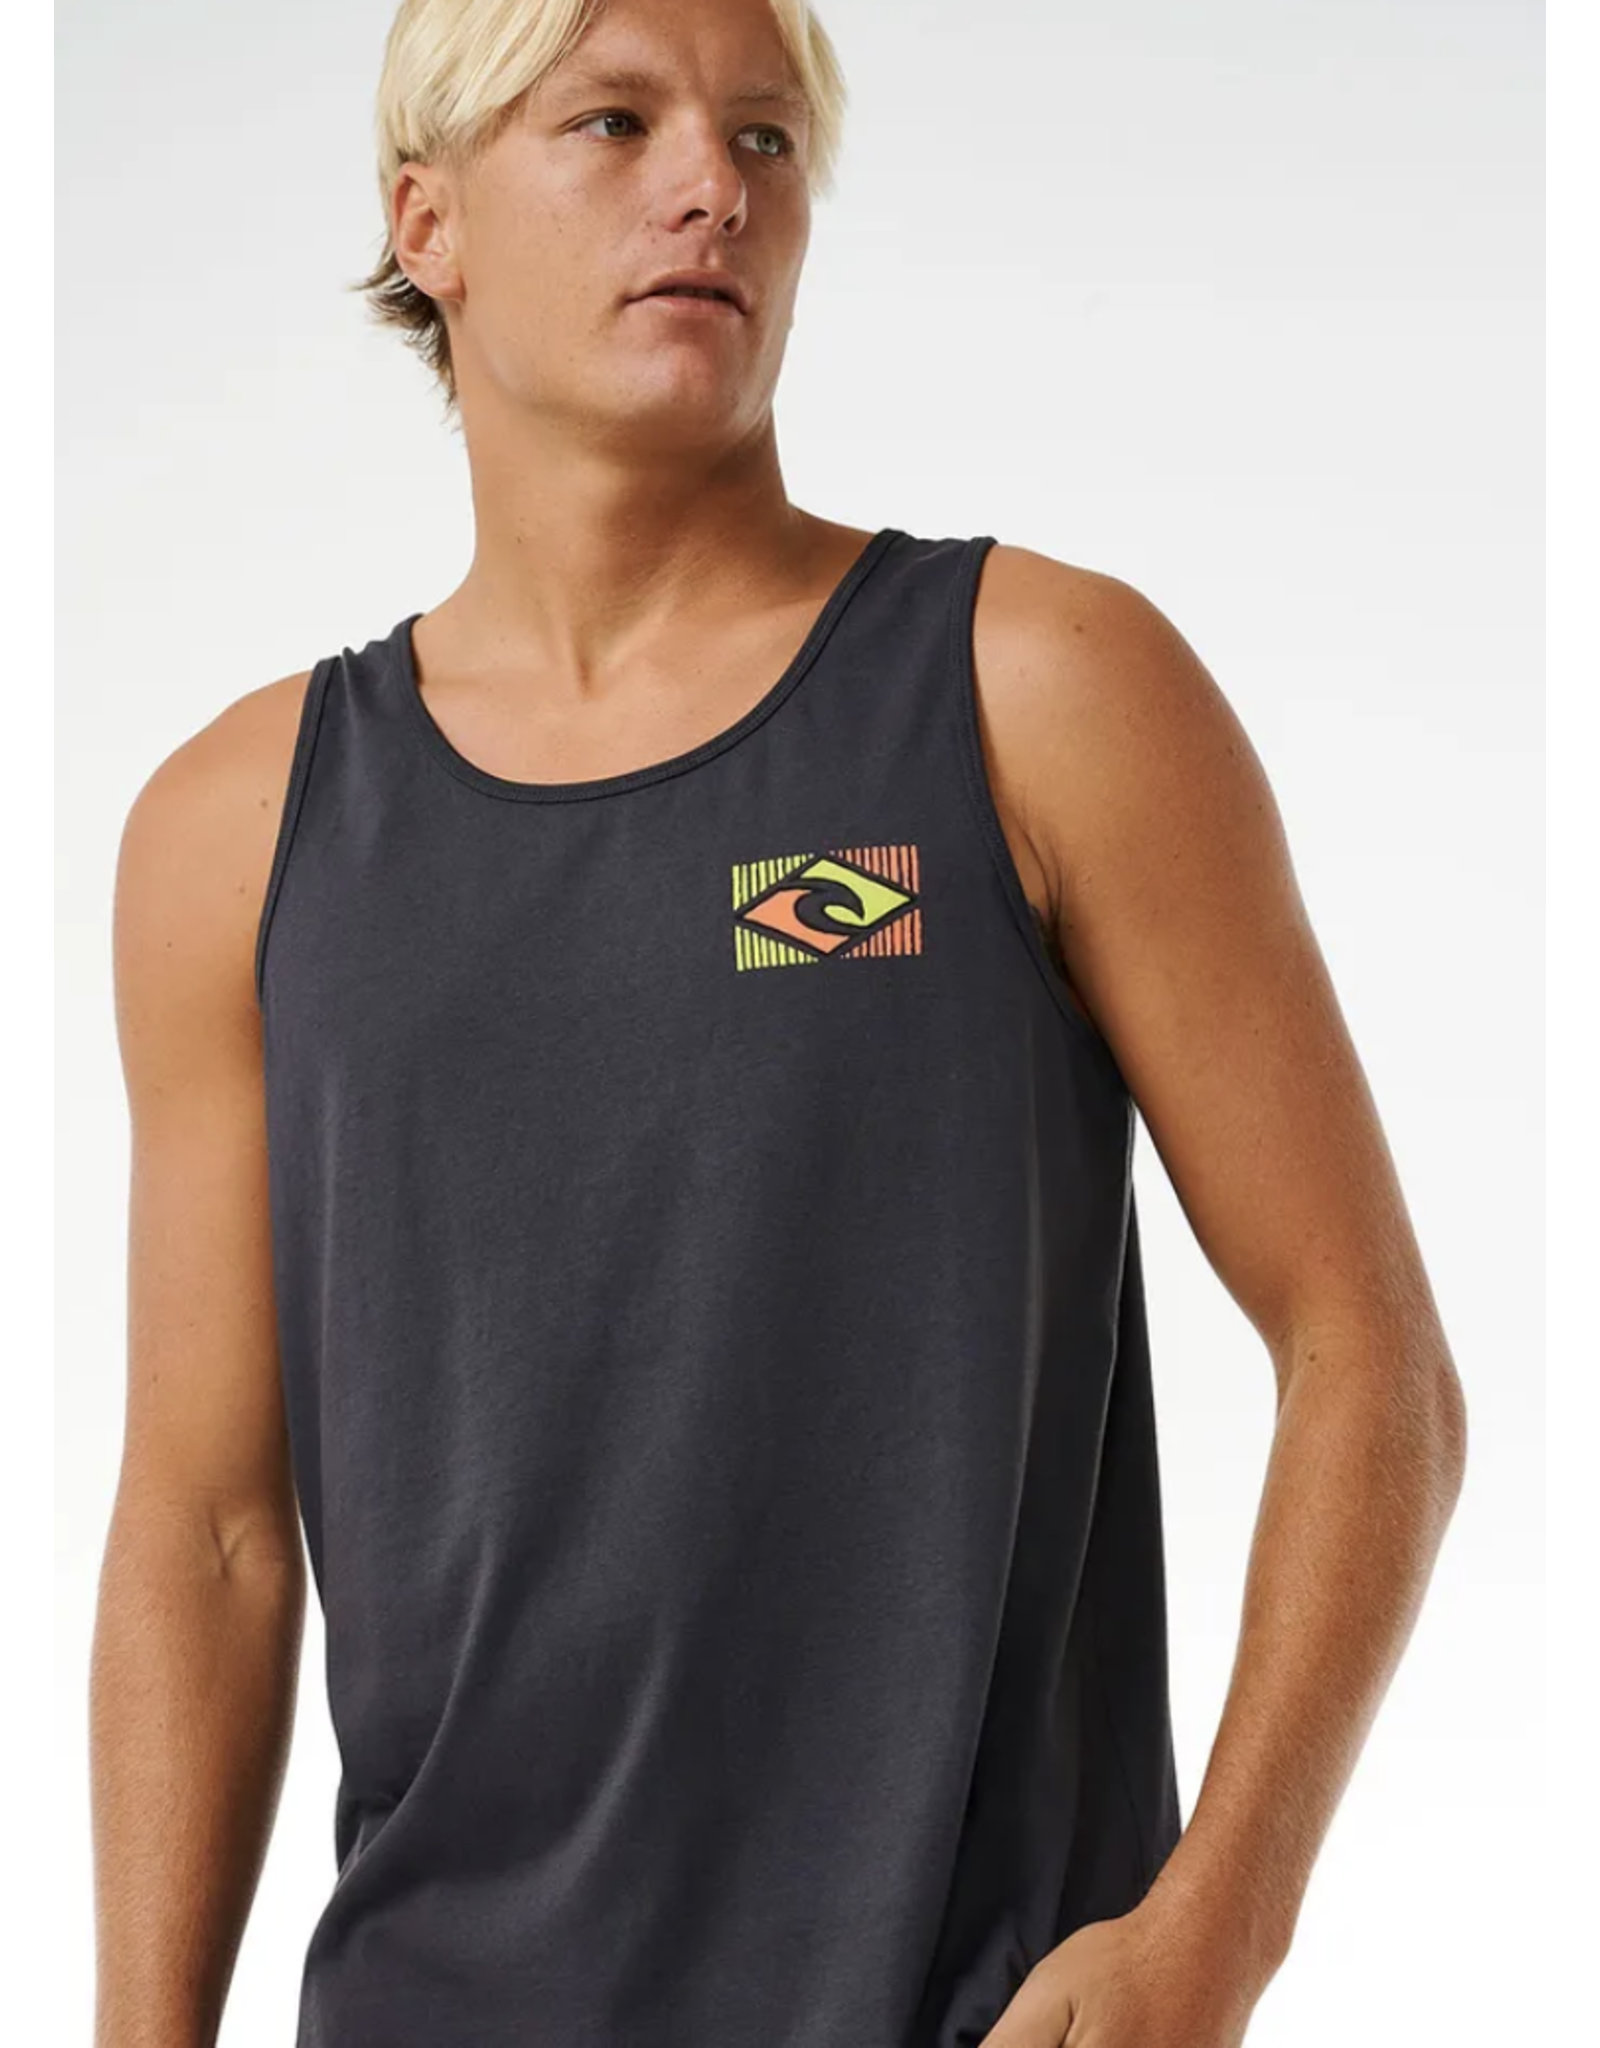 Rip Curl Rip Curl Traditional Tank Washed Black